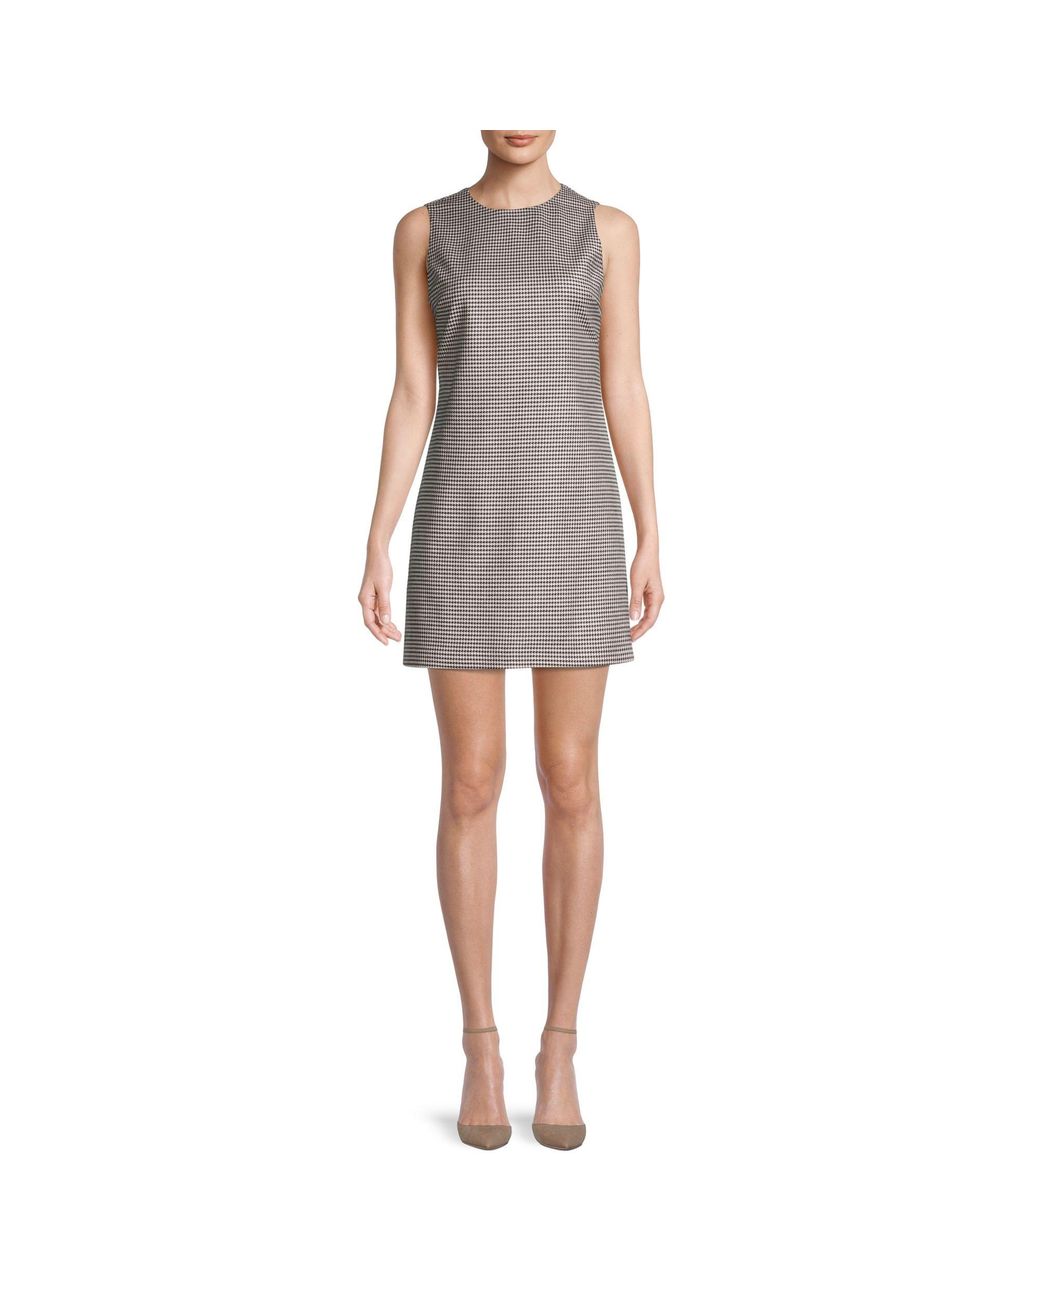 Alice + Olivia Synthetic Coley Houndstooth Dress in Grey (Gray) - Lyst